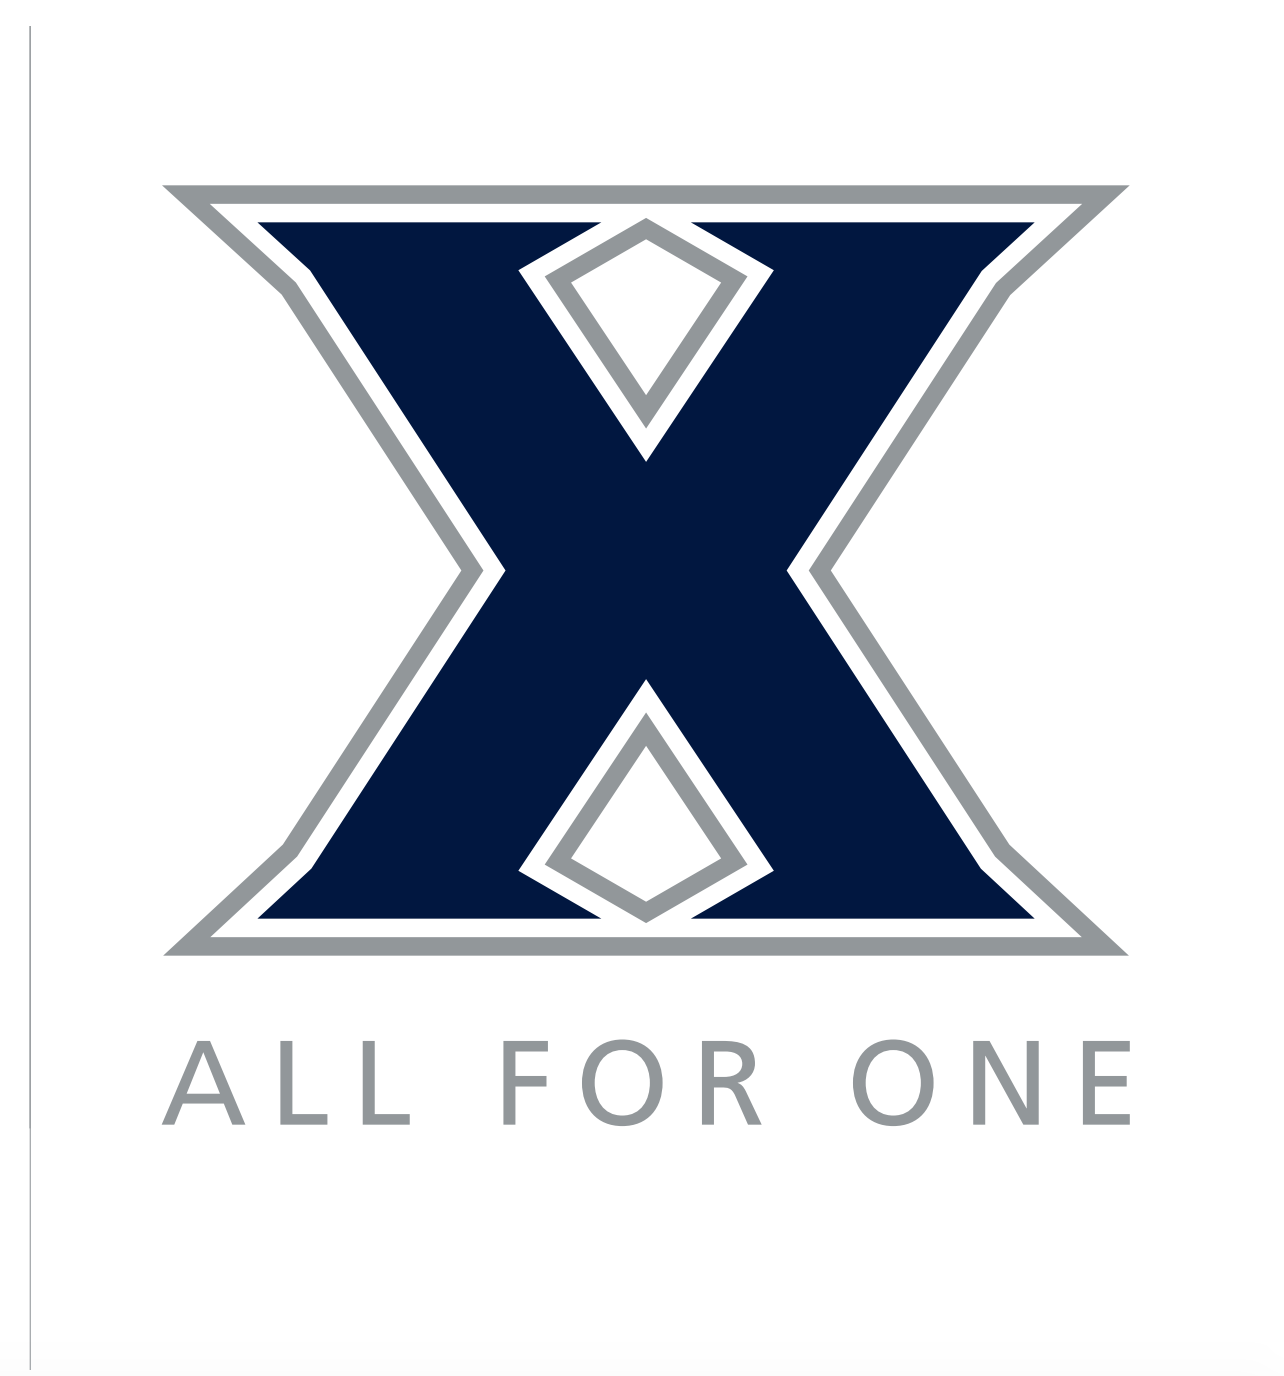 XU All For One logo